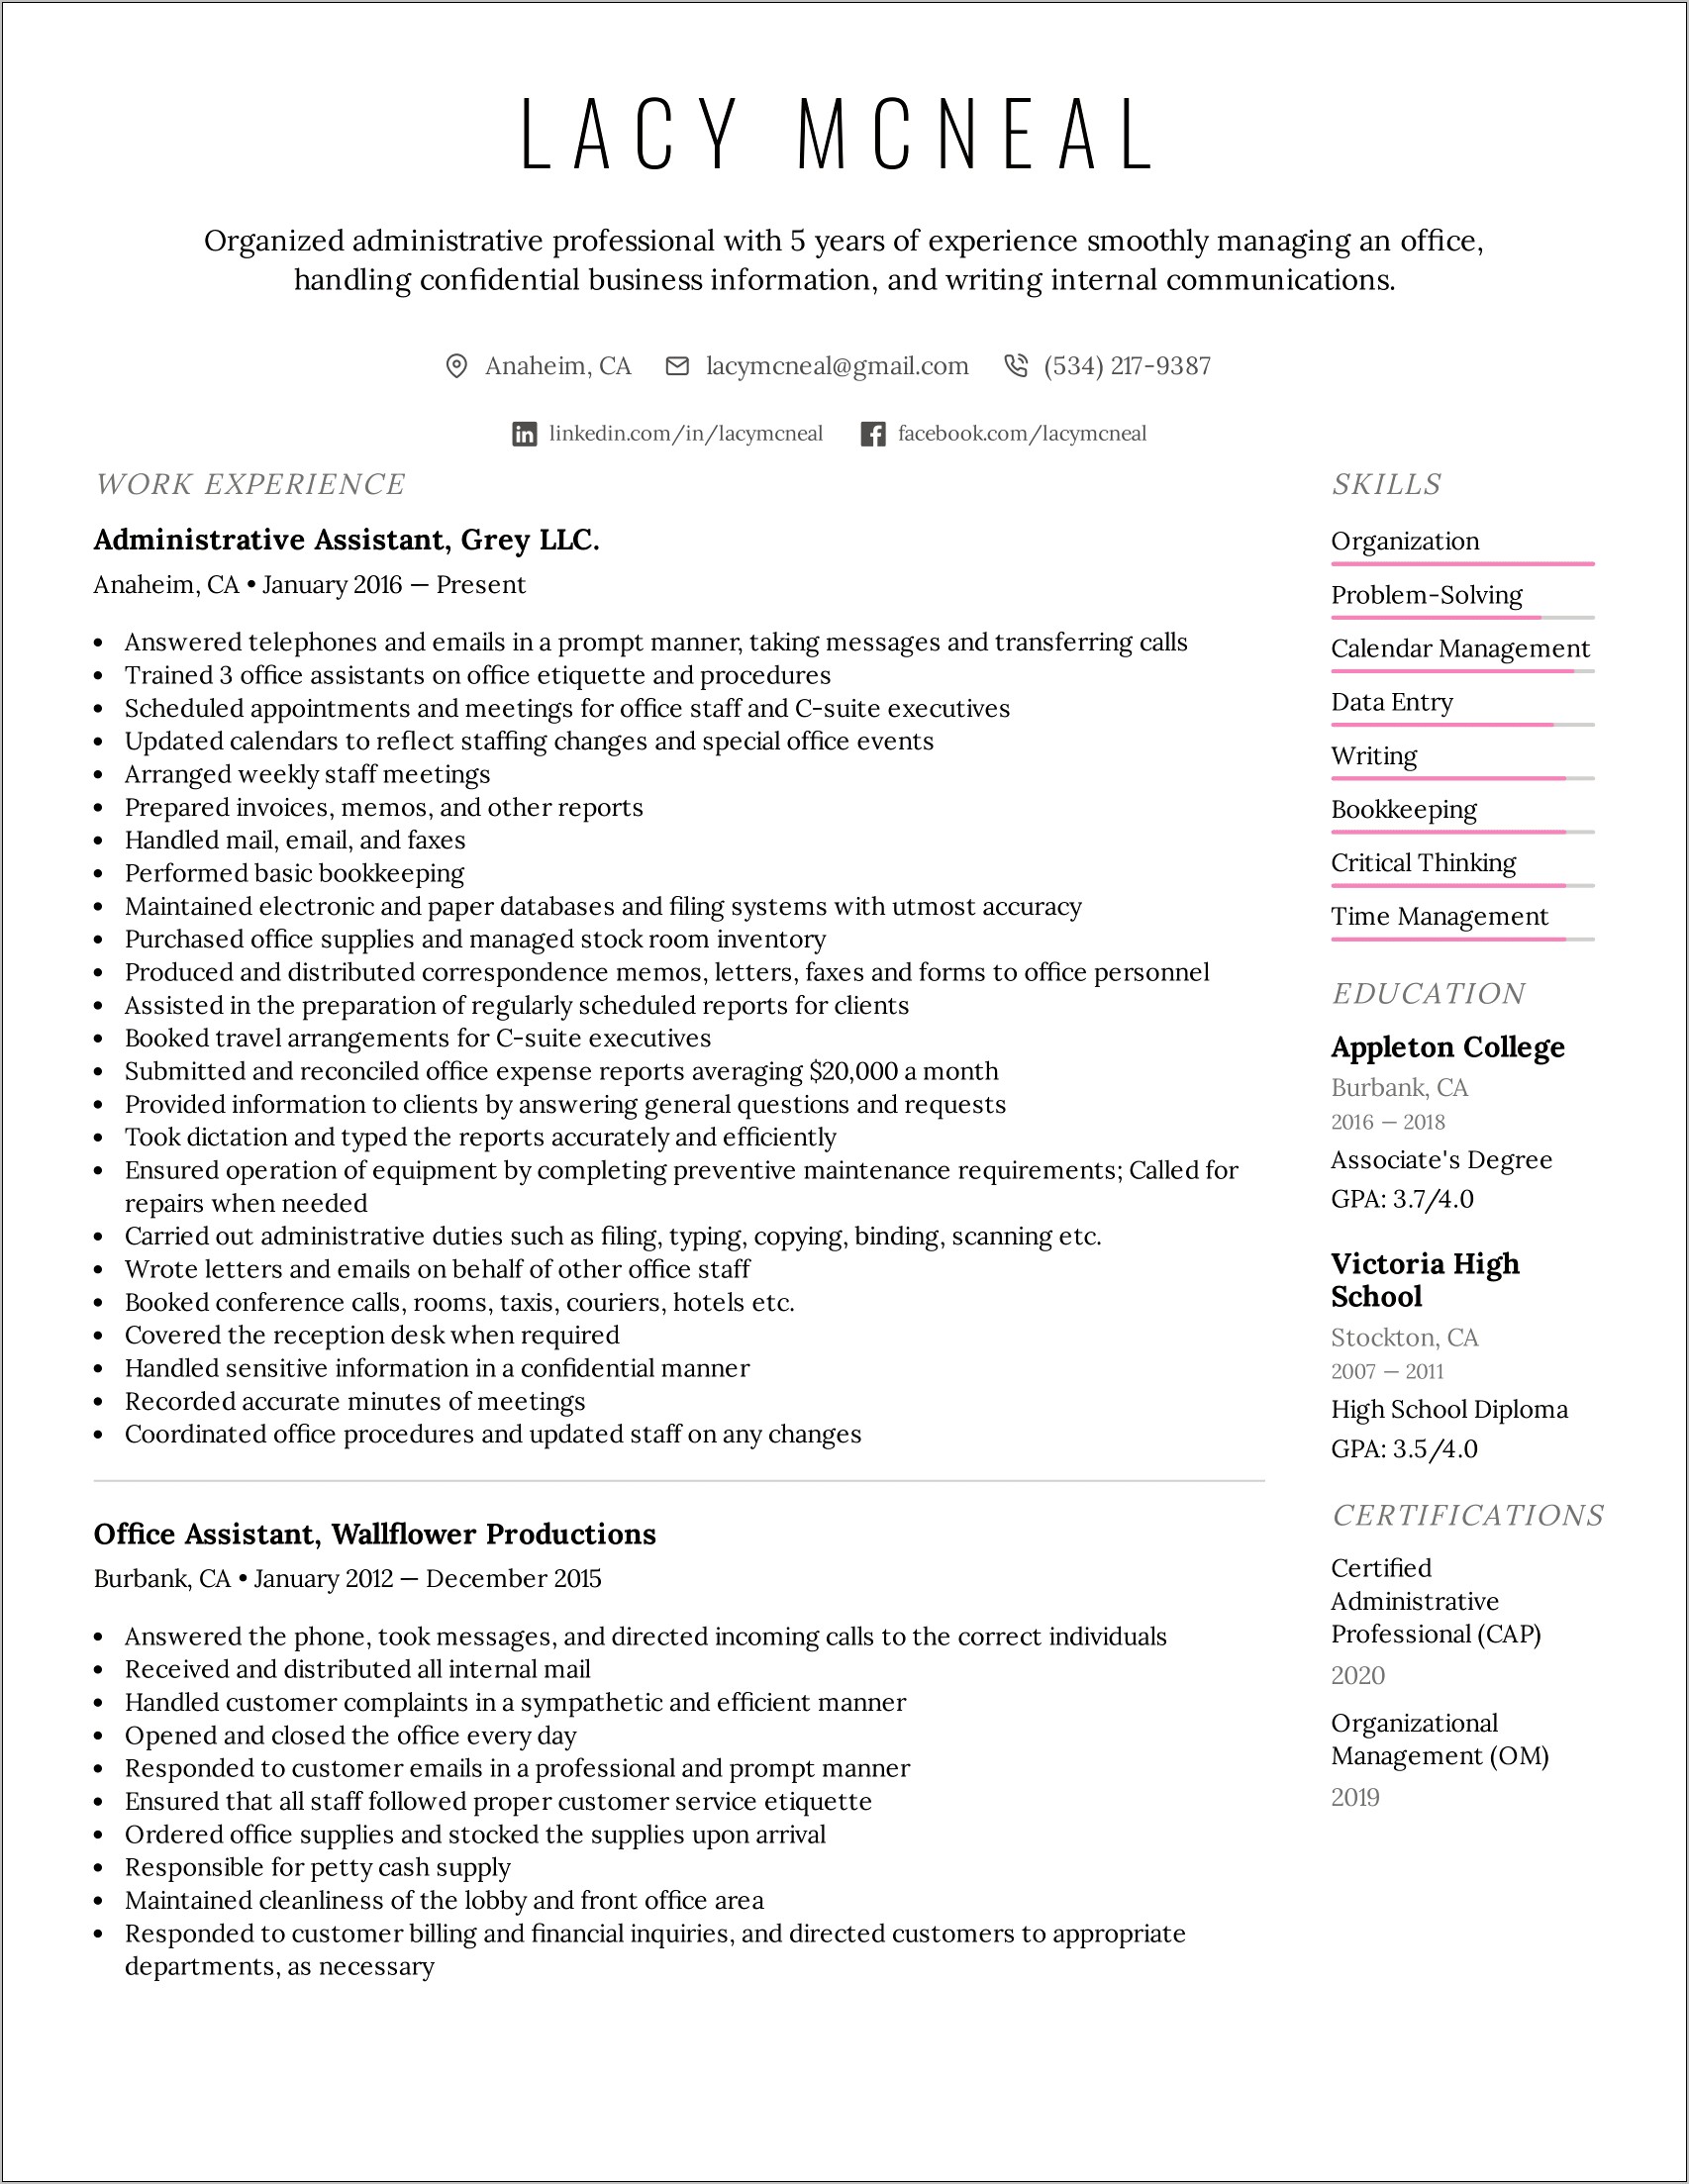 Assistant Information To Put On Resume